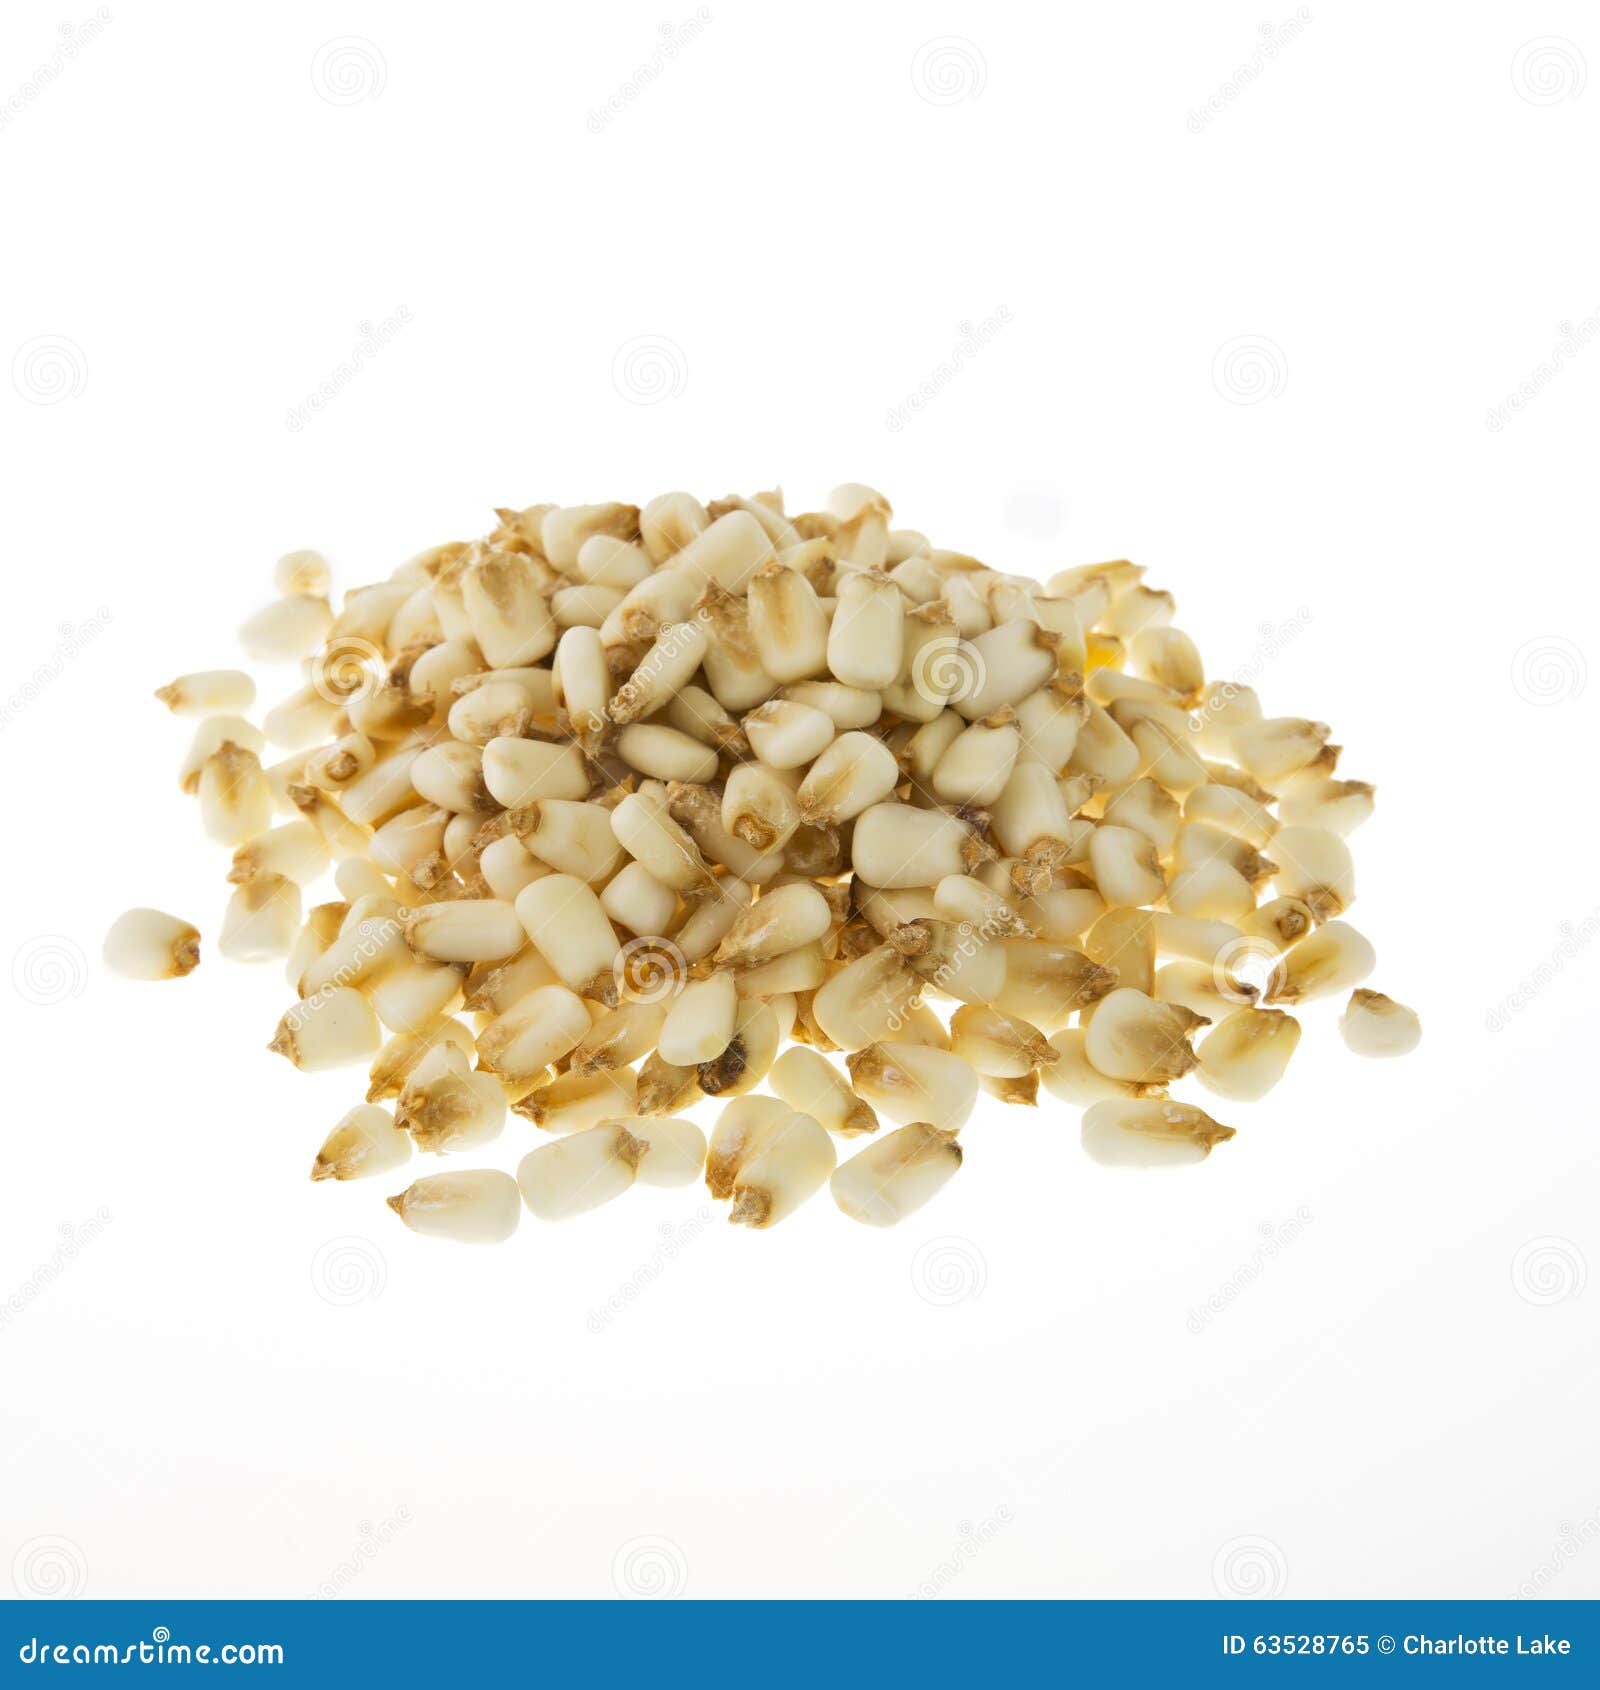 dried hominy on white